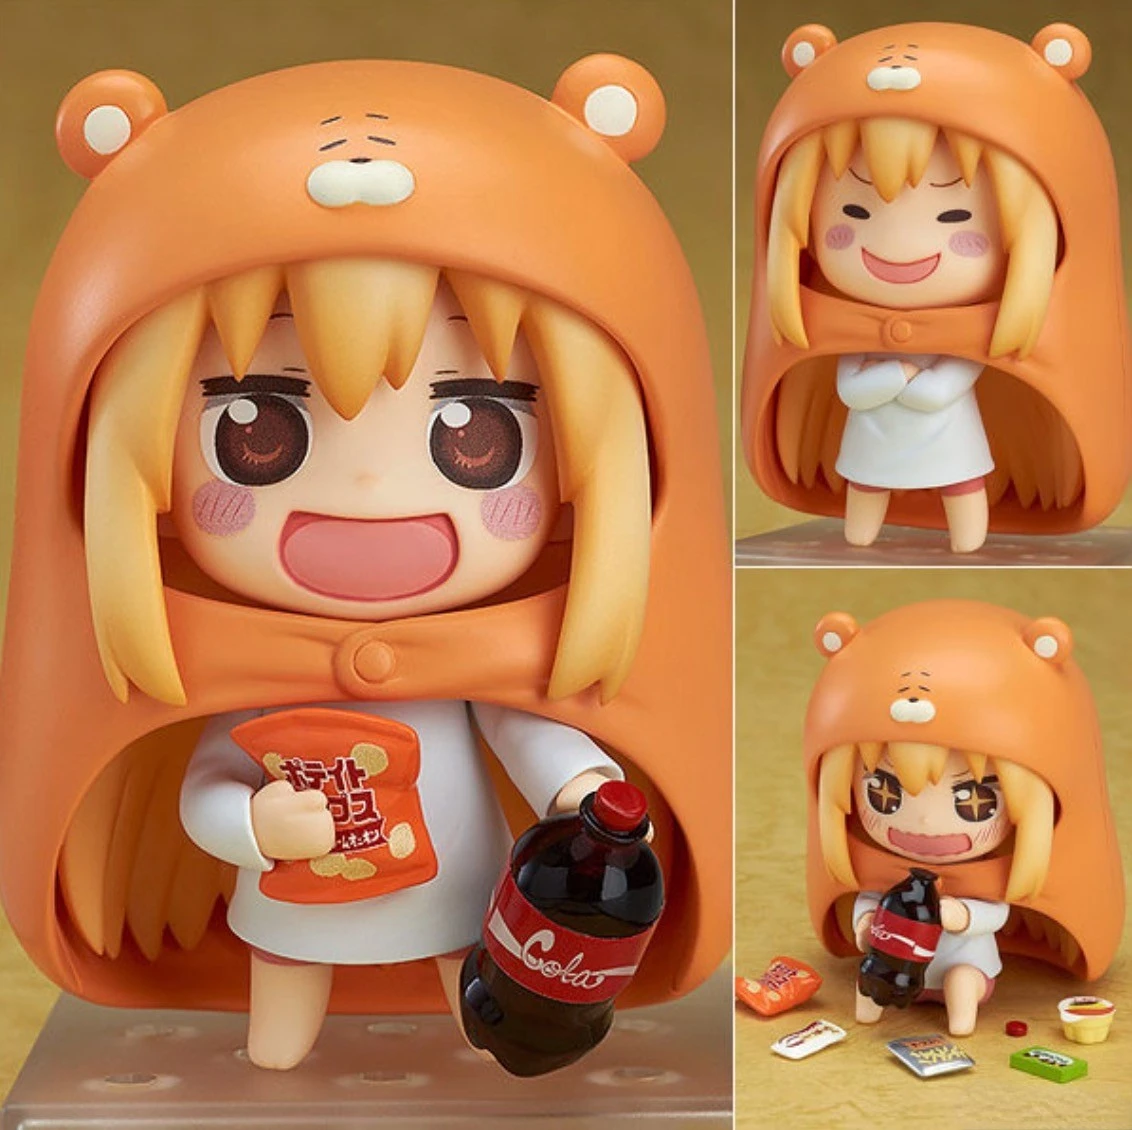 

10cm Anime Peripheral Character Himouto Umaru-chan New Umaru Action Figure PVC toys Collection figures for friends and kid gifts